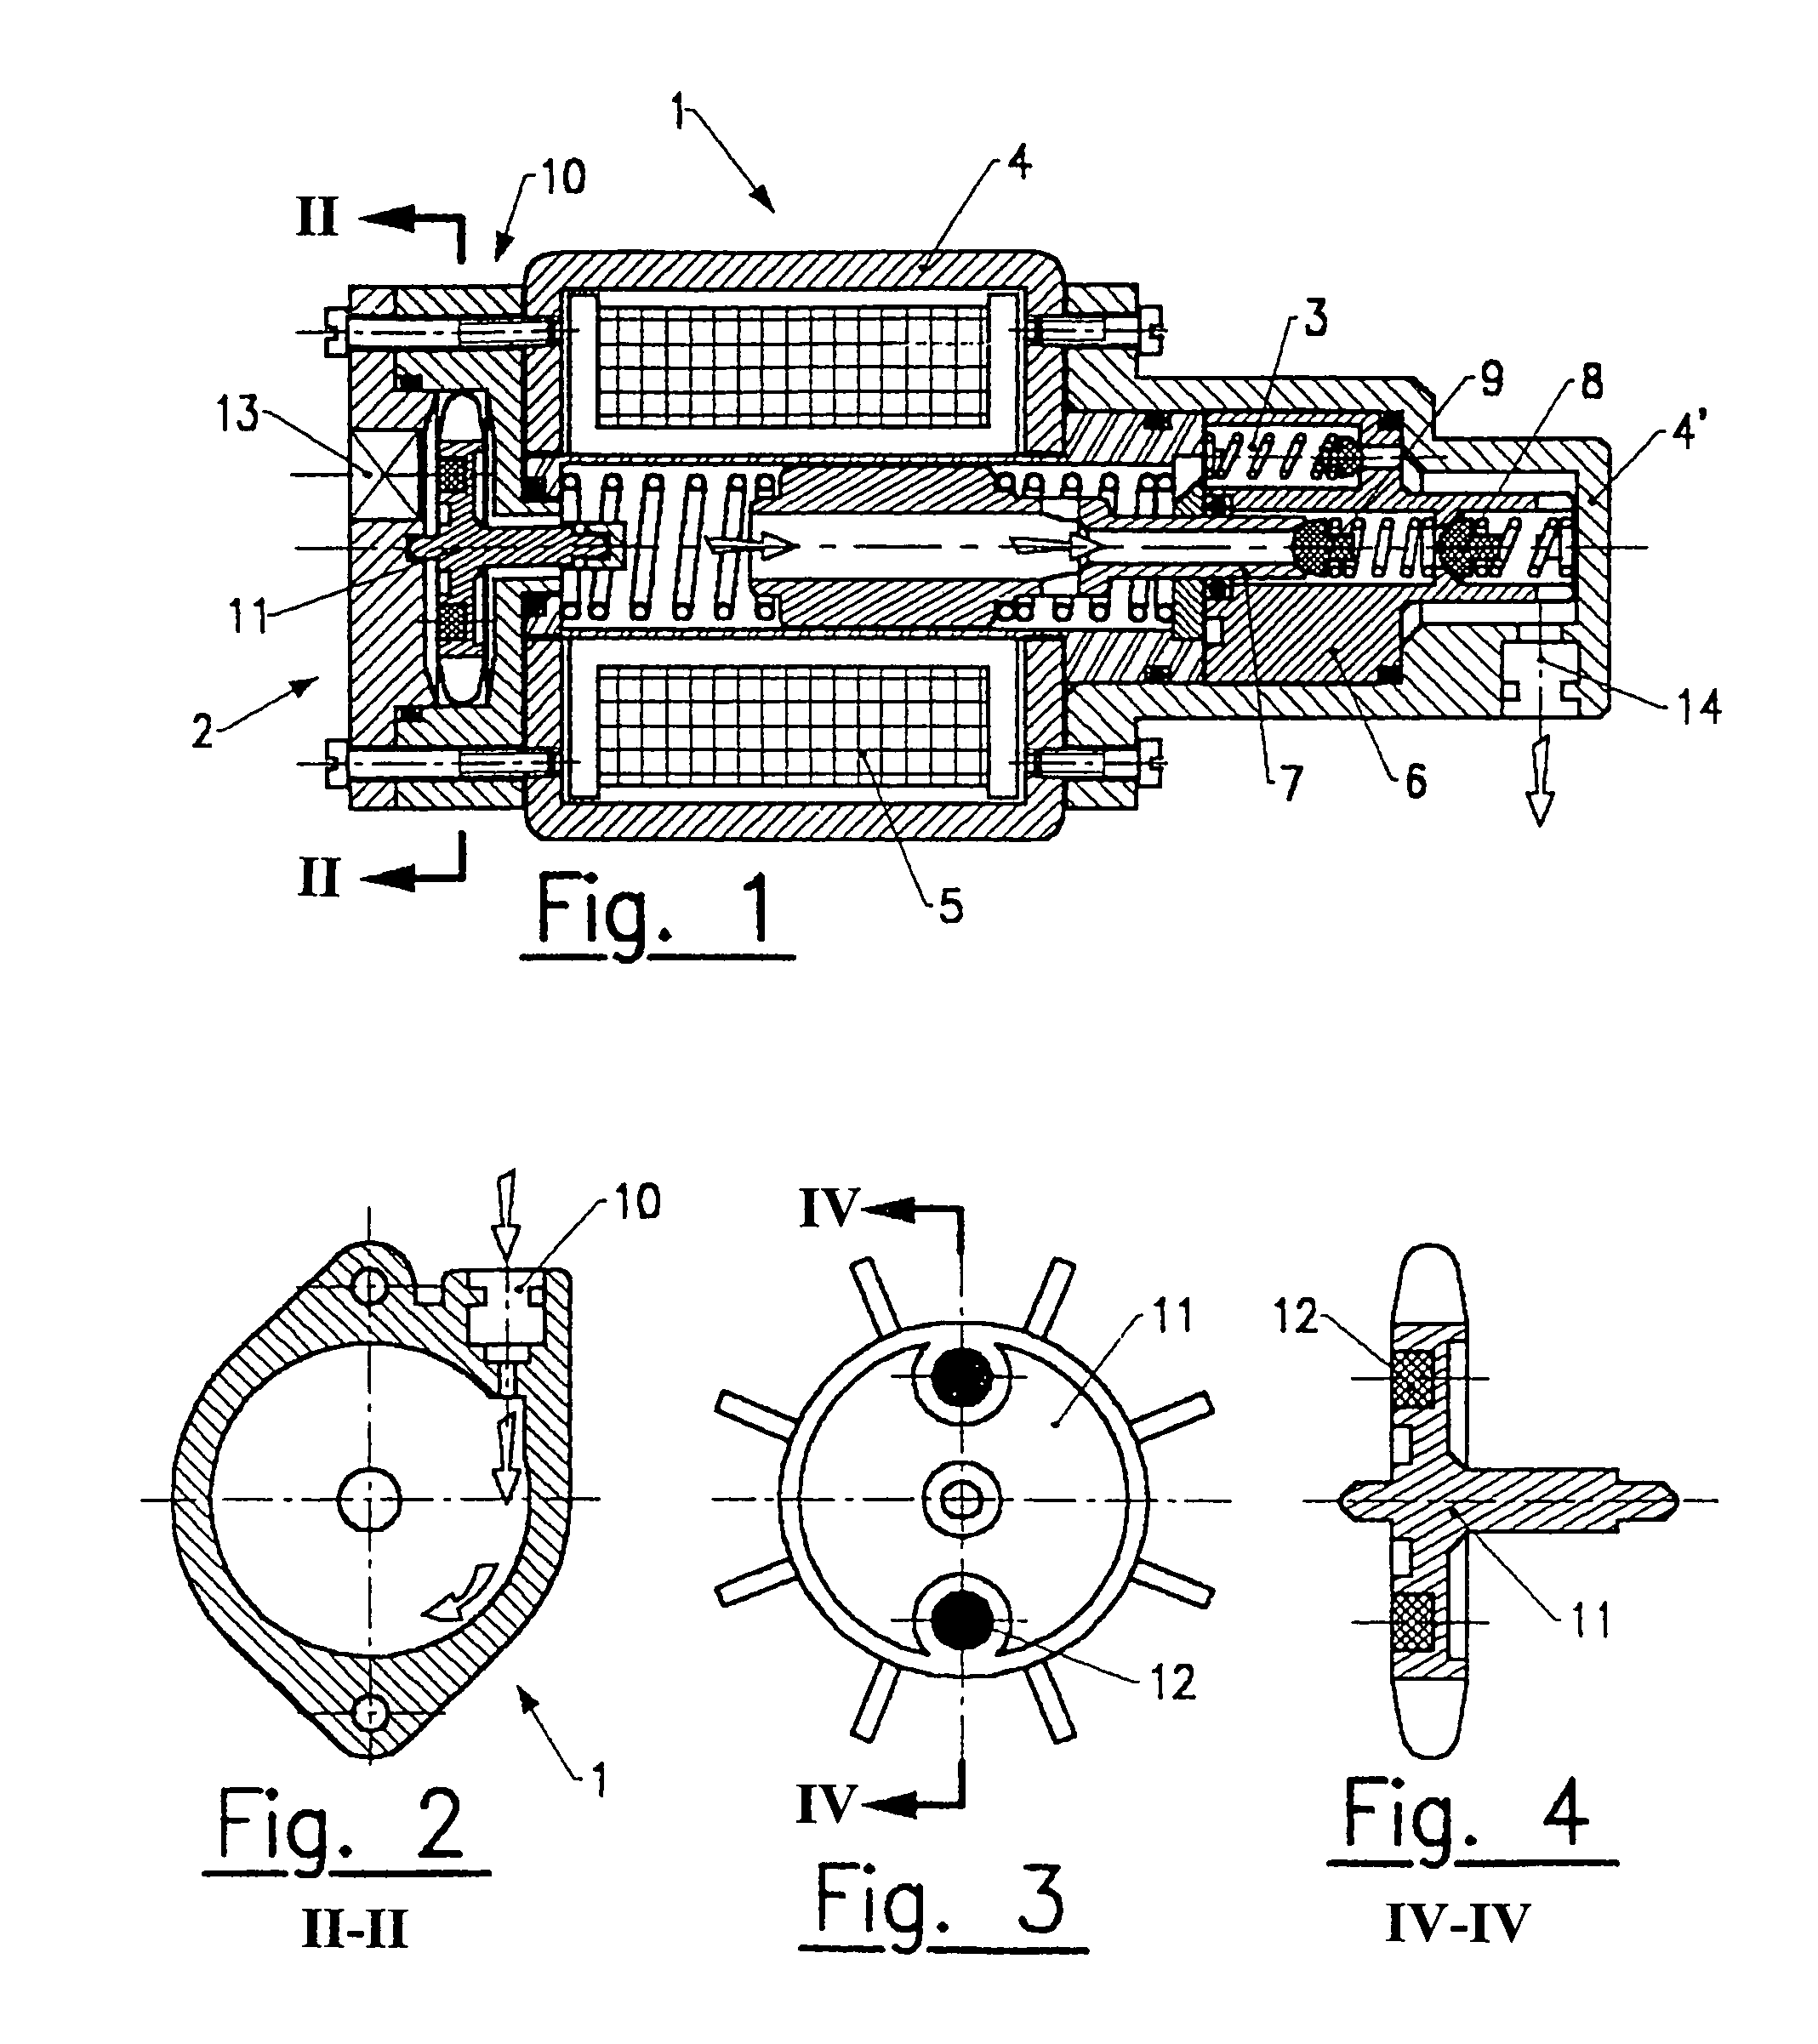 Motor pump system with axial through flow utilizing an incorporated flowmeter and pressure controller